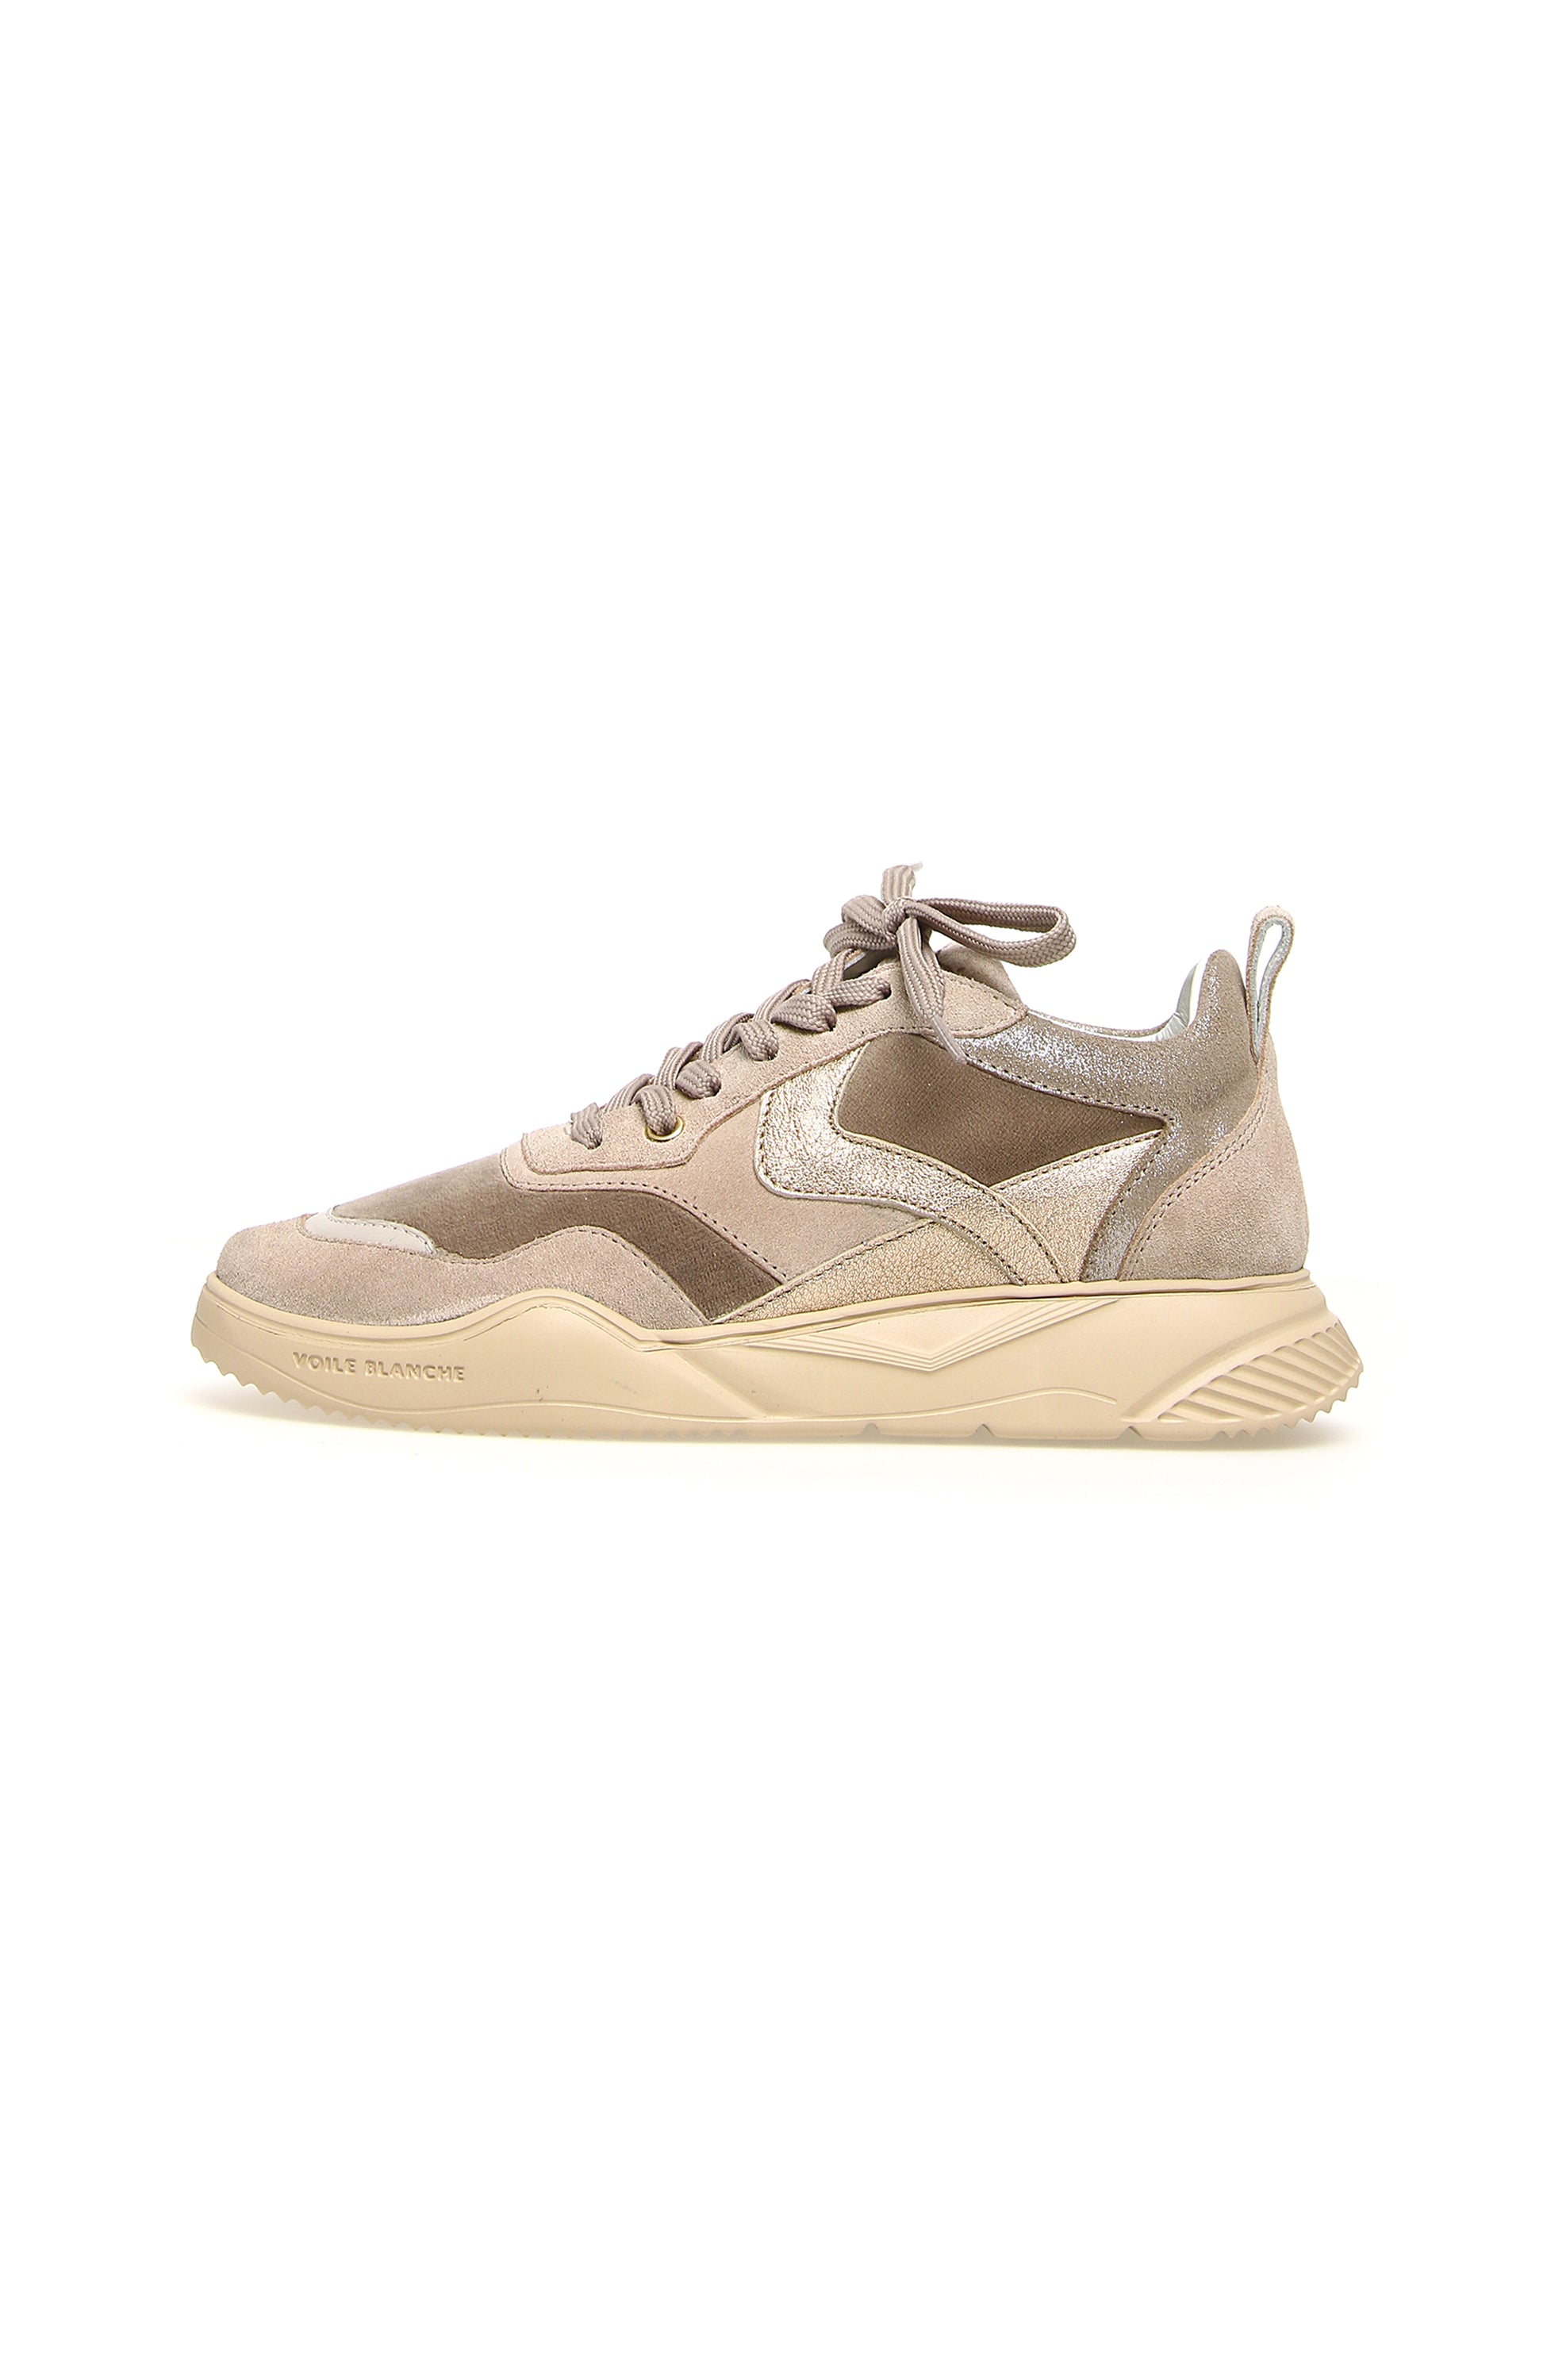 Lightweight suede sneakers VOILE BLANCHE